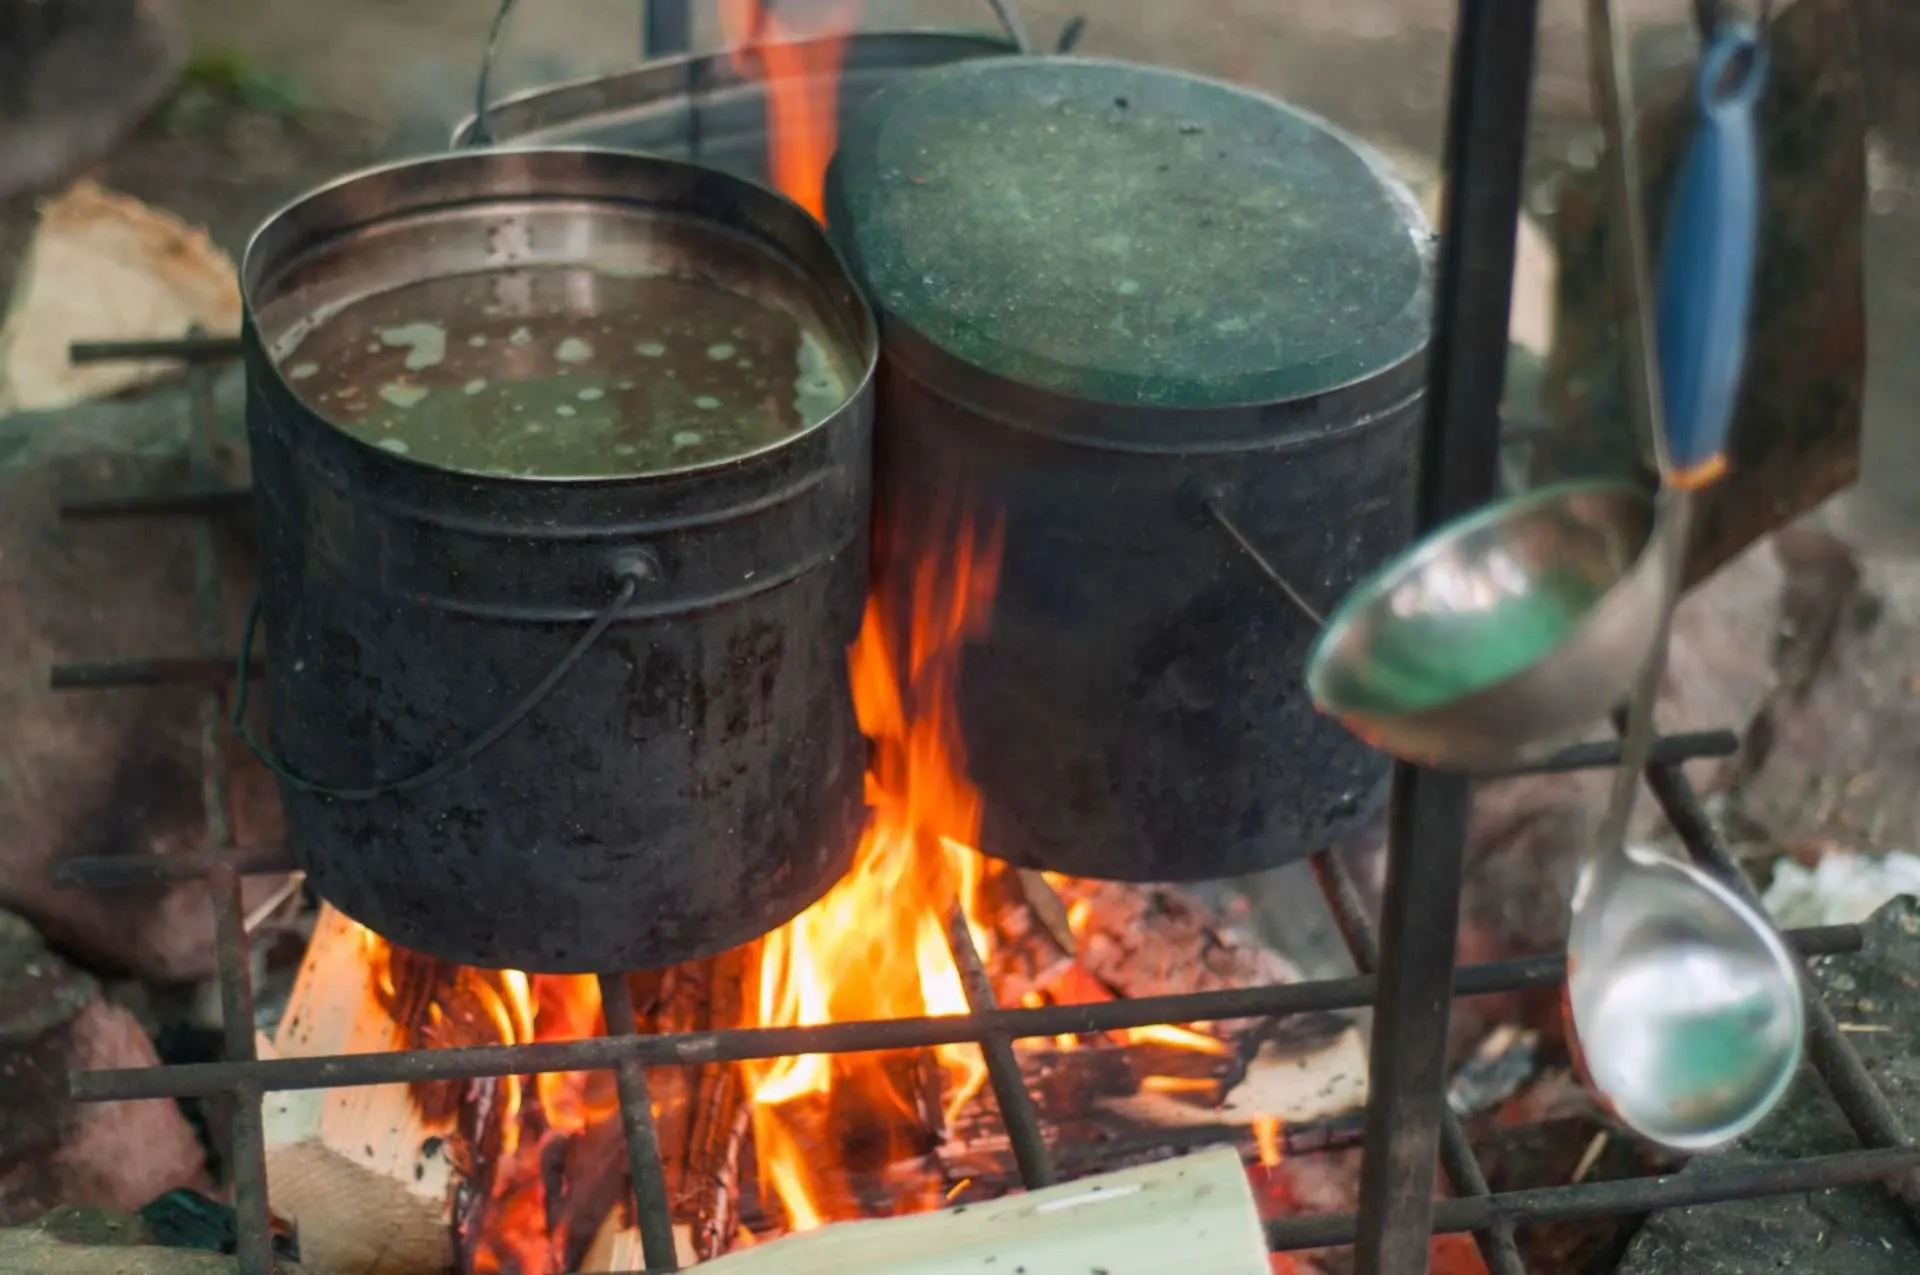 Pots of water being boiled on campfire.